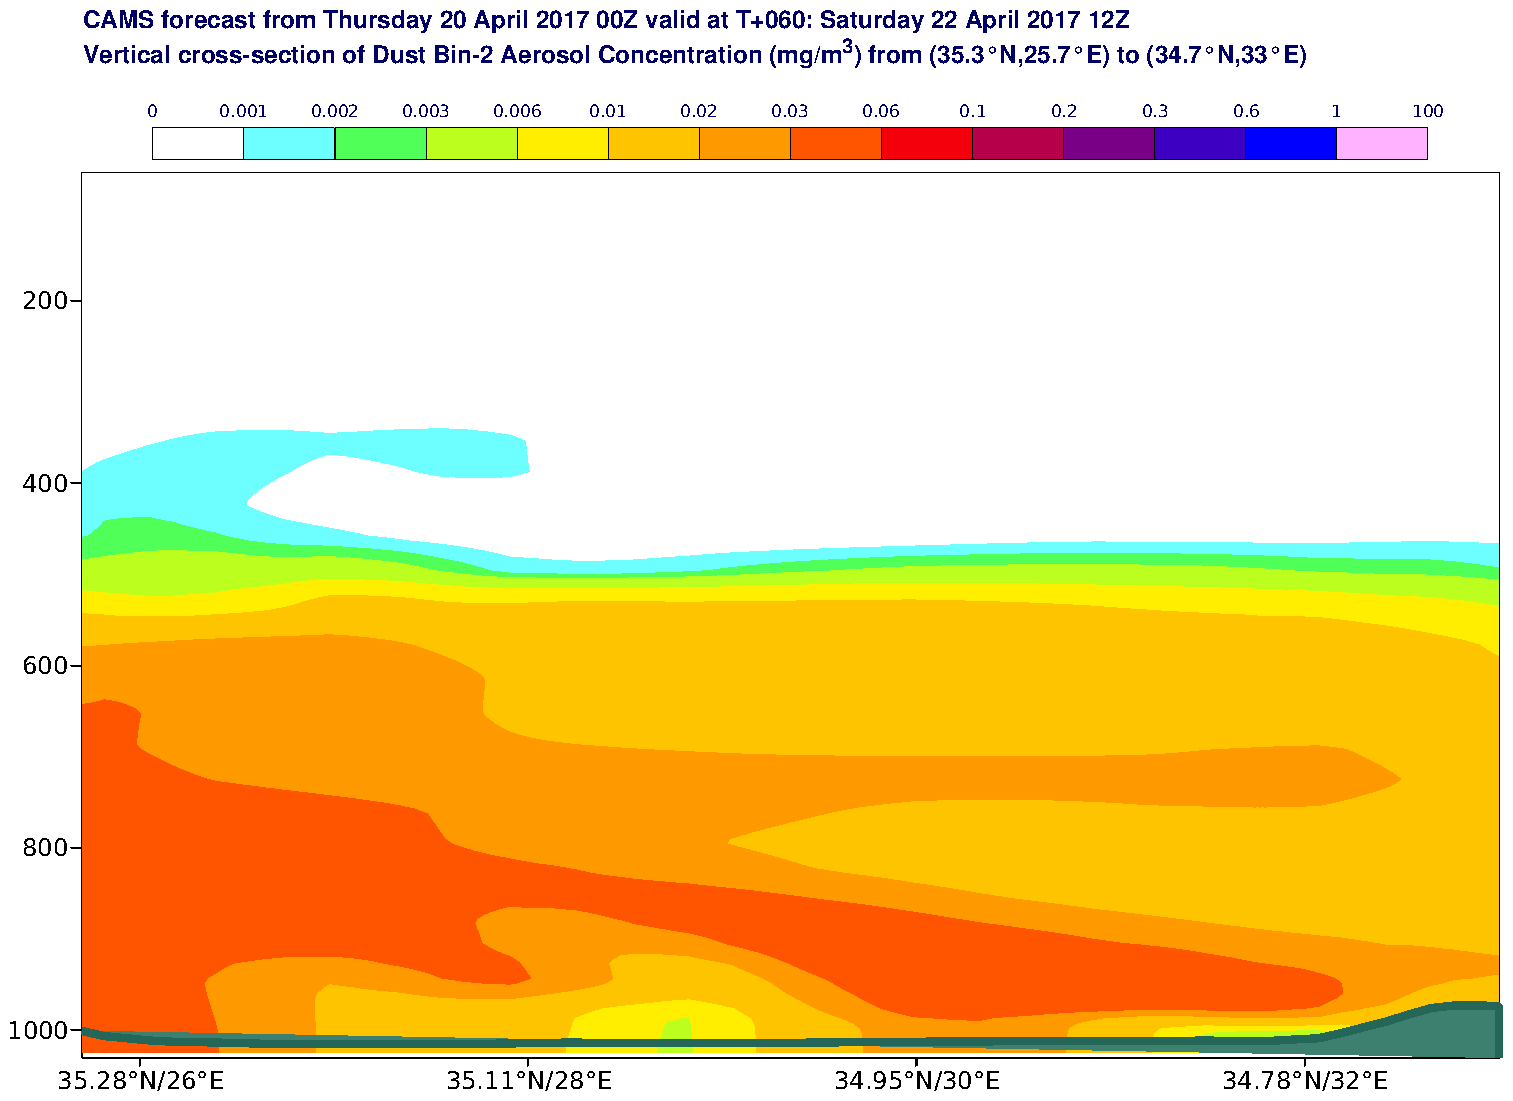 Vertical cross-section of Dust Bin-2 Aerosol Concentration (mg/m3) valid at T60 - 2017-04-22 12:00